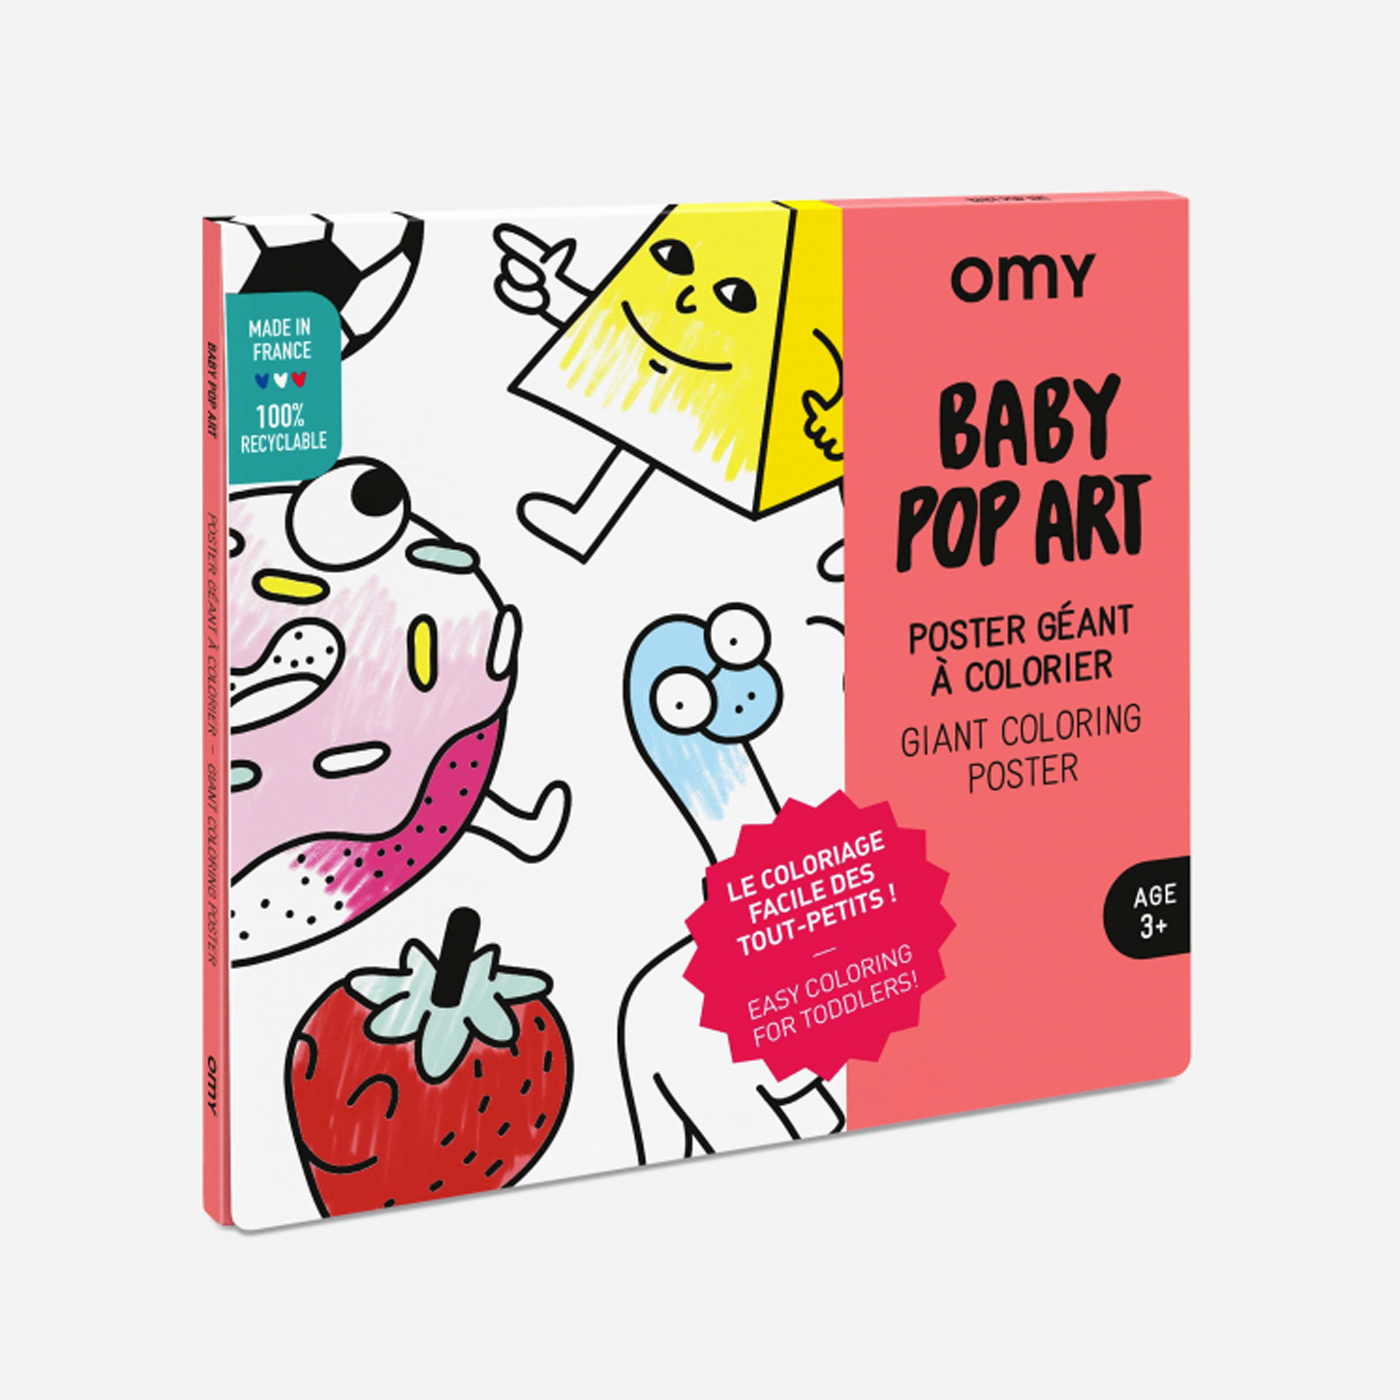 OMY Omy Coloring Poster  | Baby Pop Art